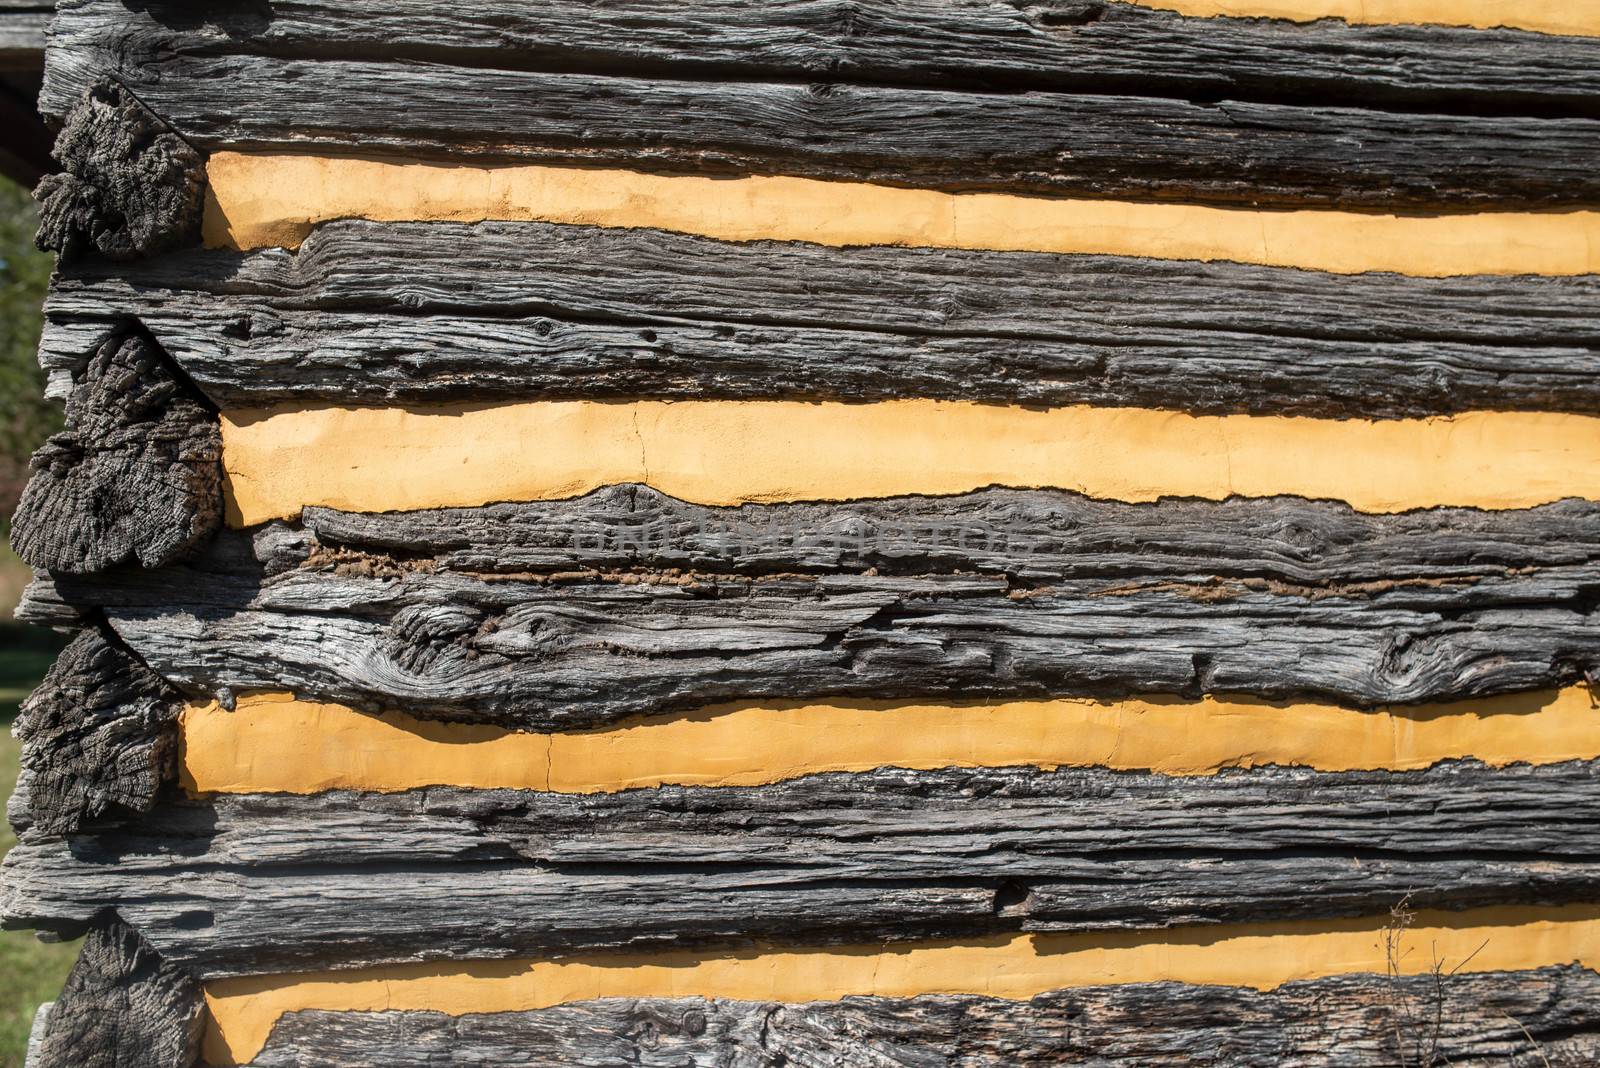 Log cabin at the historic Daniel Boone Homestead in Pennsylvania, built in 1730. Full frame image in natural sunlight shows texture in ancient logs and smooth golden yellow plaster chinking.